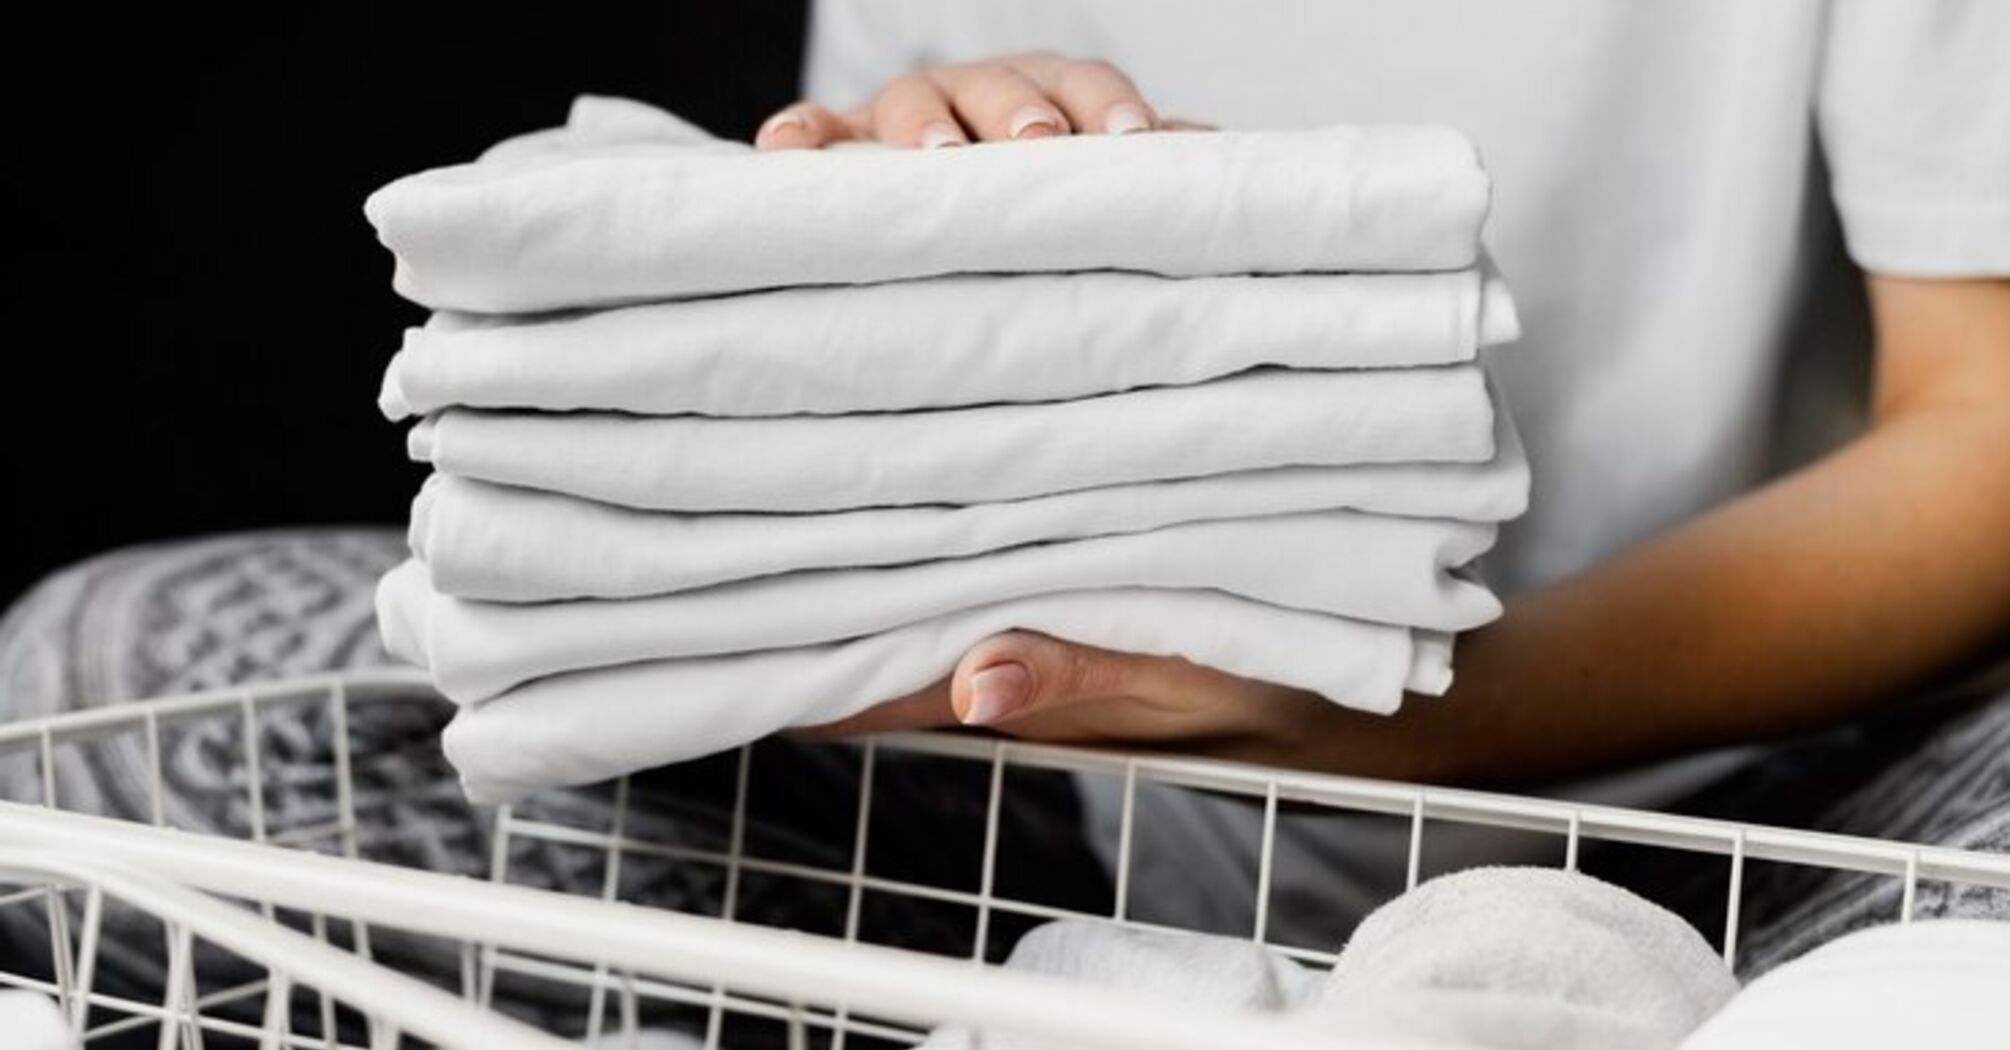 Laundry in hotels